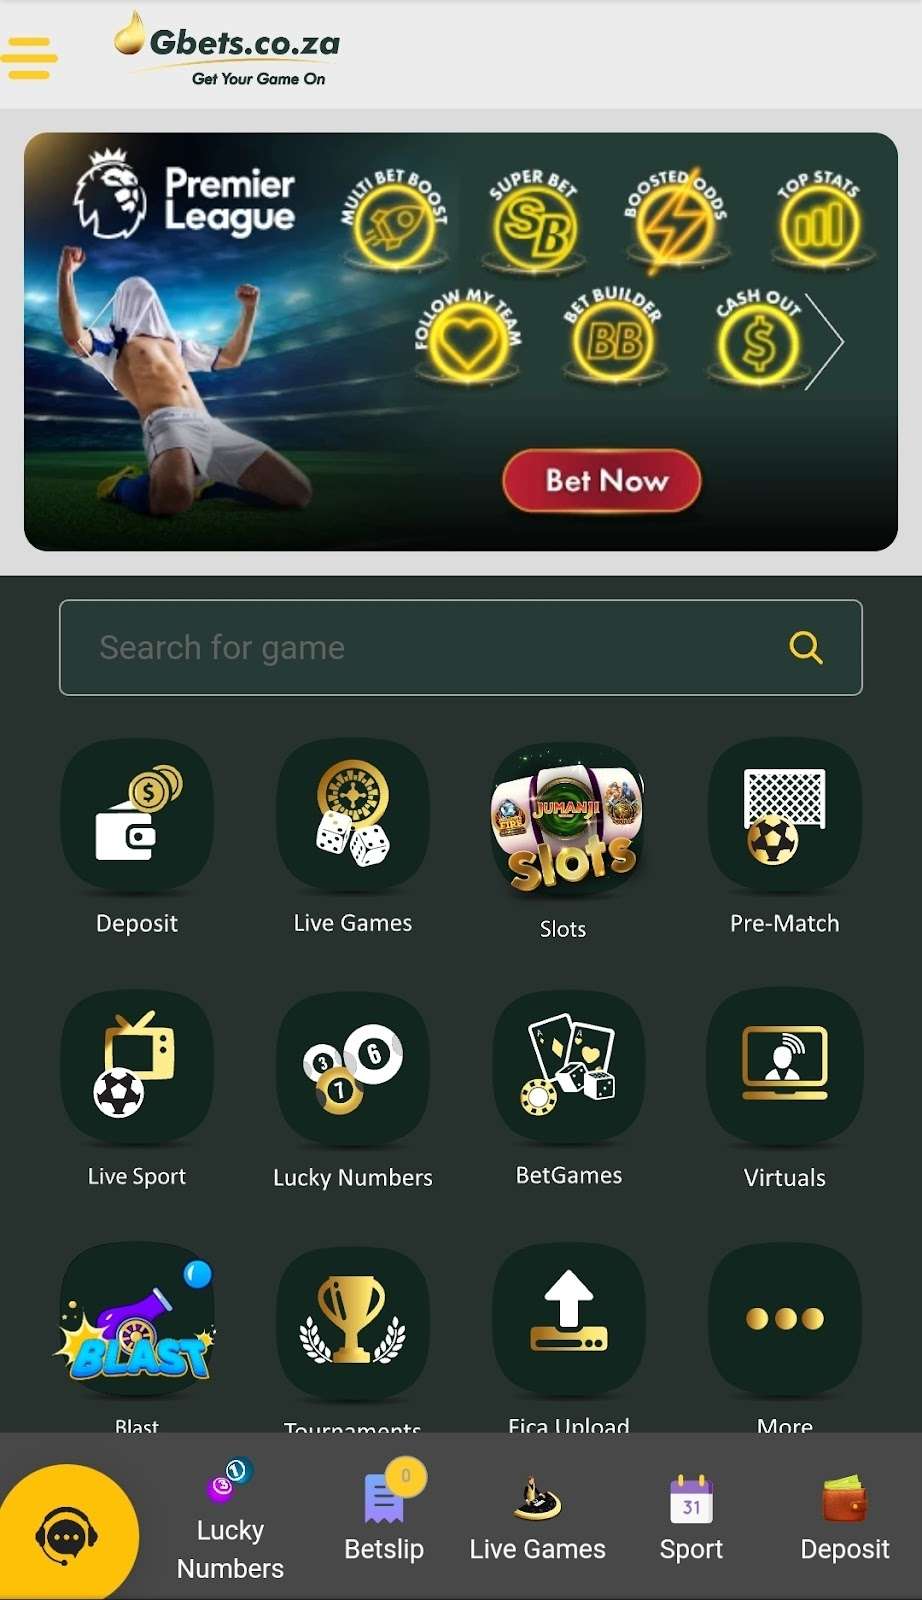 gbets app preview south africa screenshot